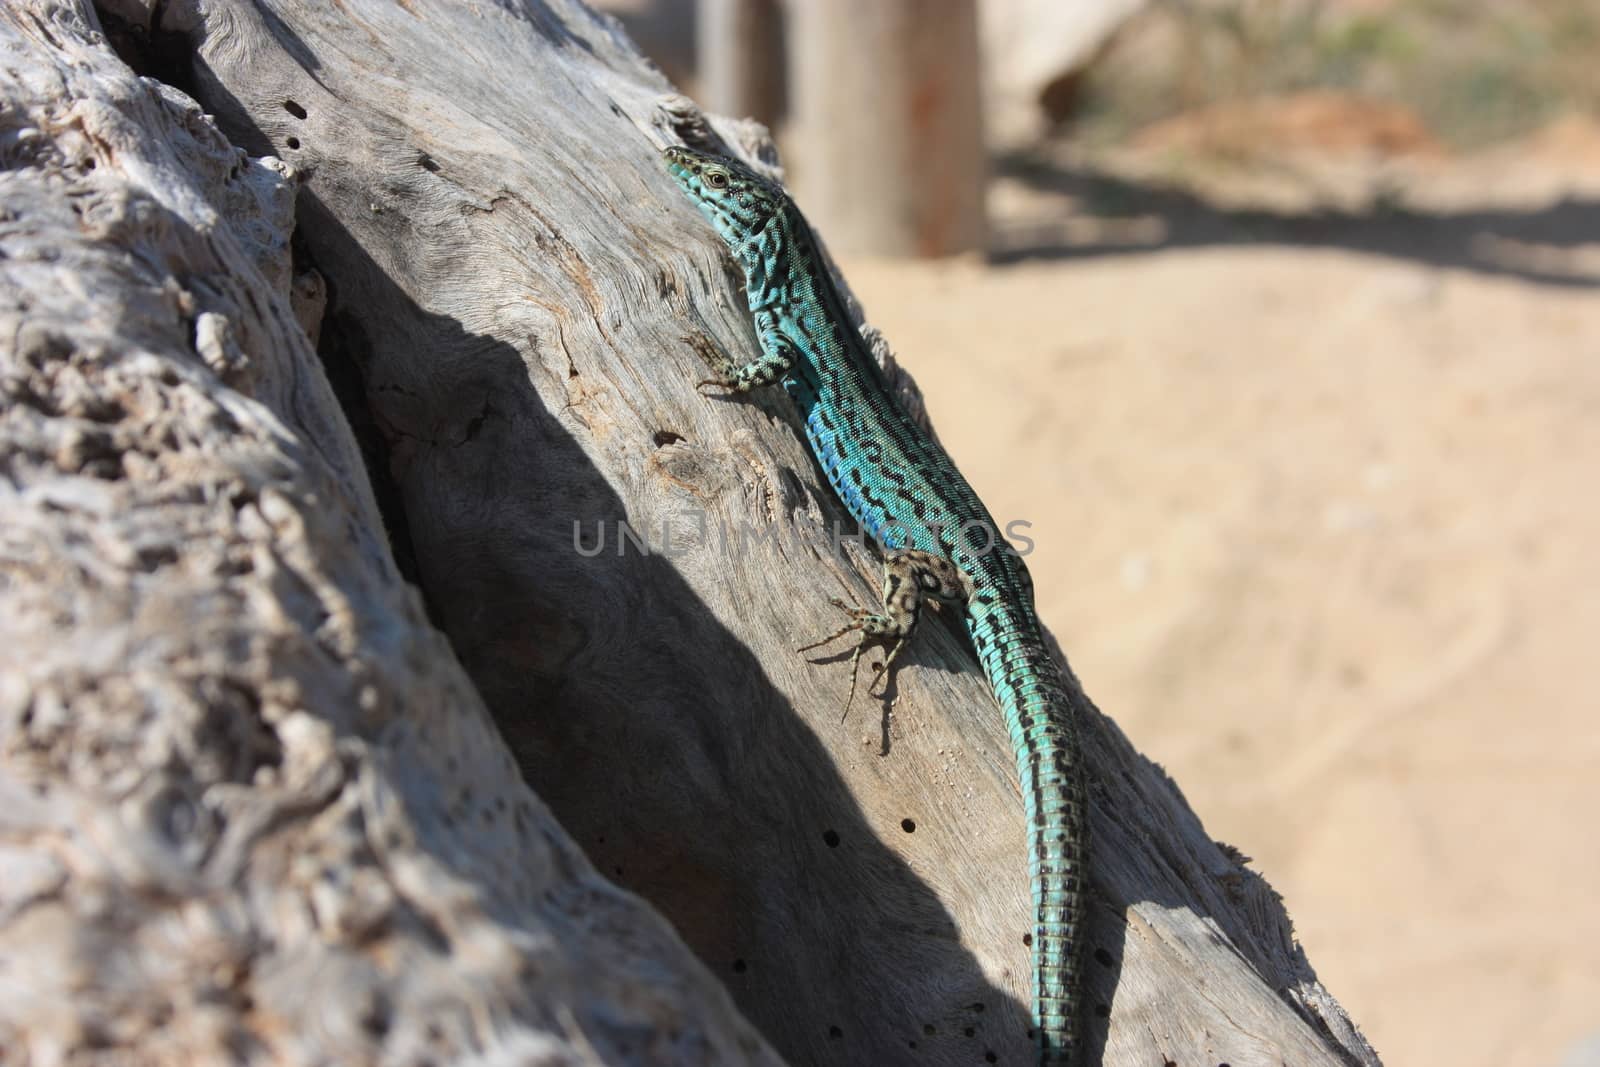 a lone green lizard on a dry trunk of a tree in the middle of the arid desert in spain